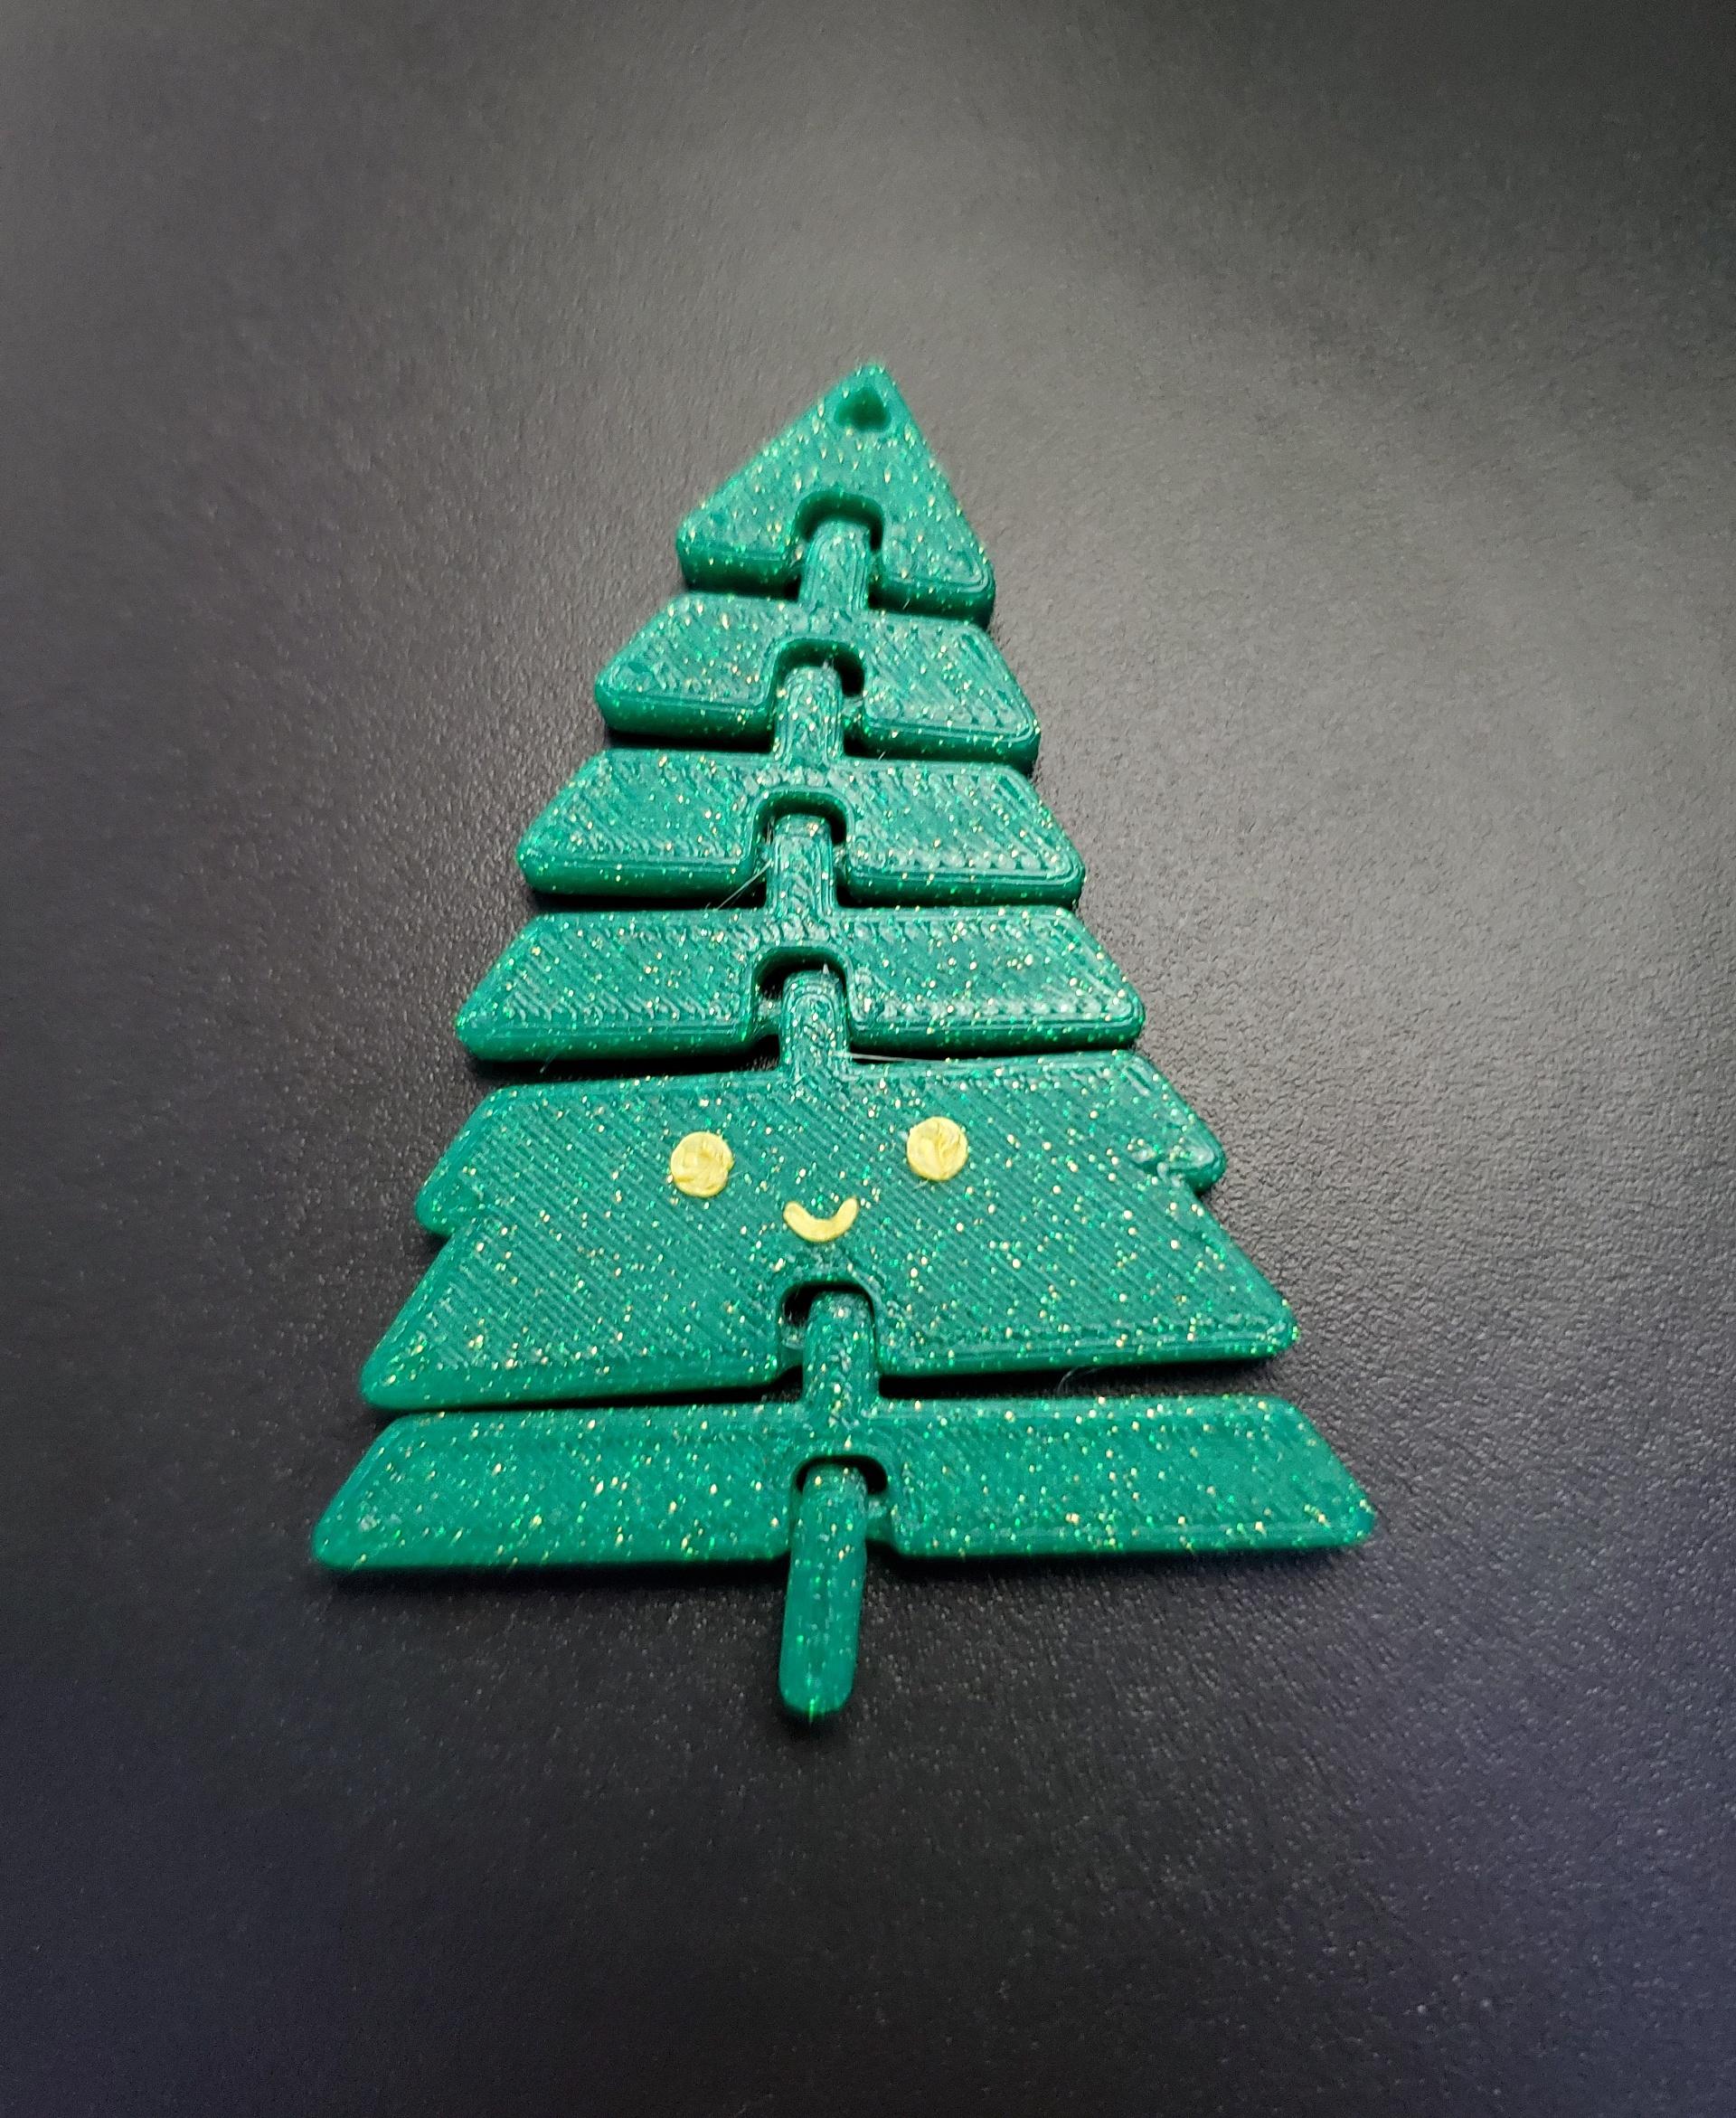 Articulated Kawaii Christmas Tree Keychain - Print in place fidget toy - 3mf - protopasta forest fantasy green - 3d model